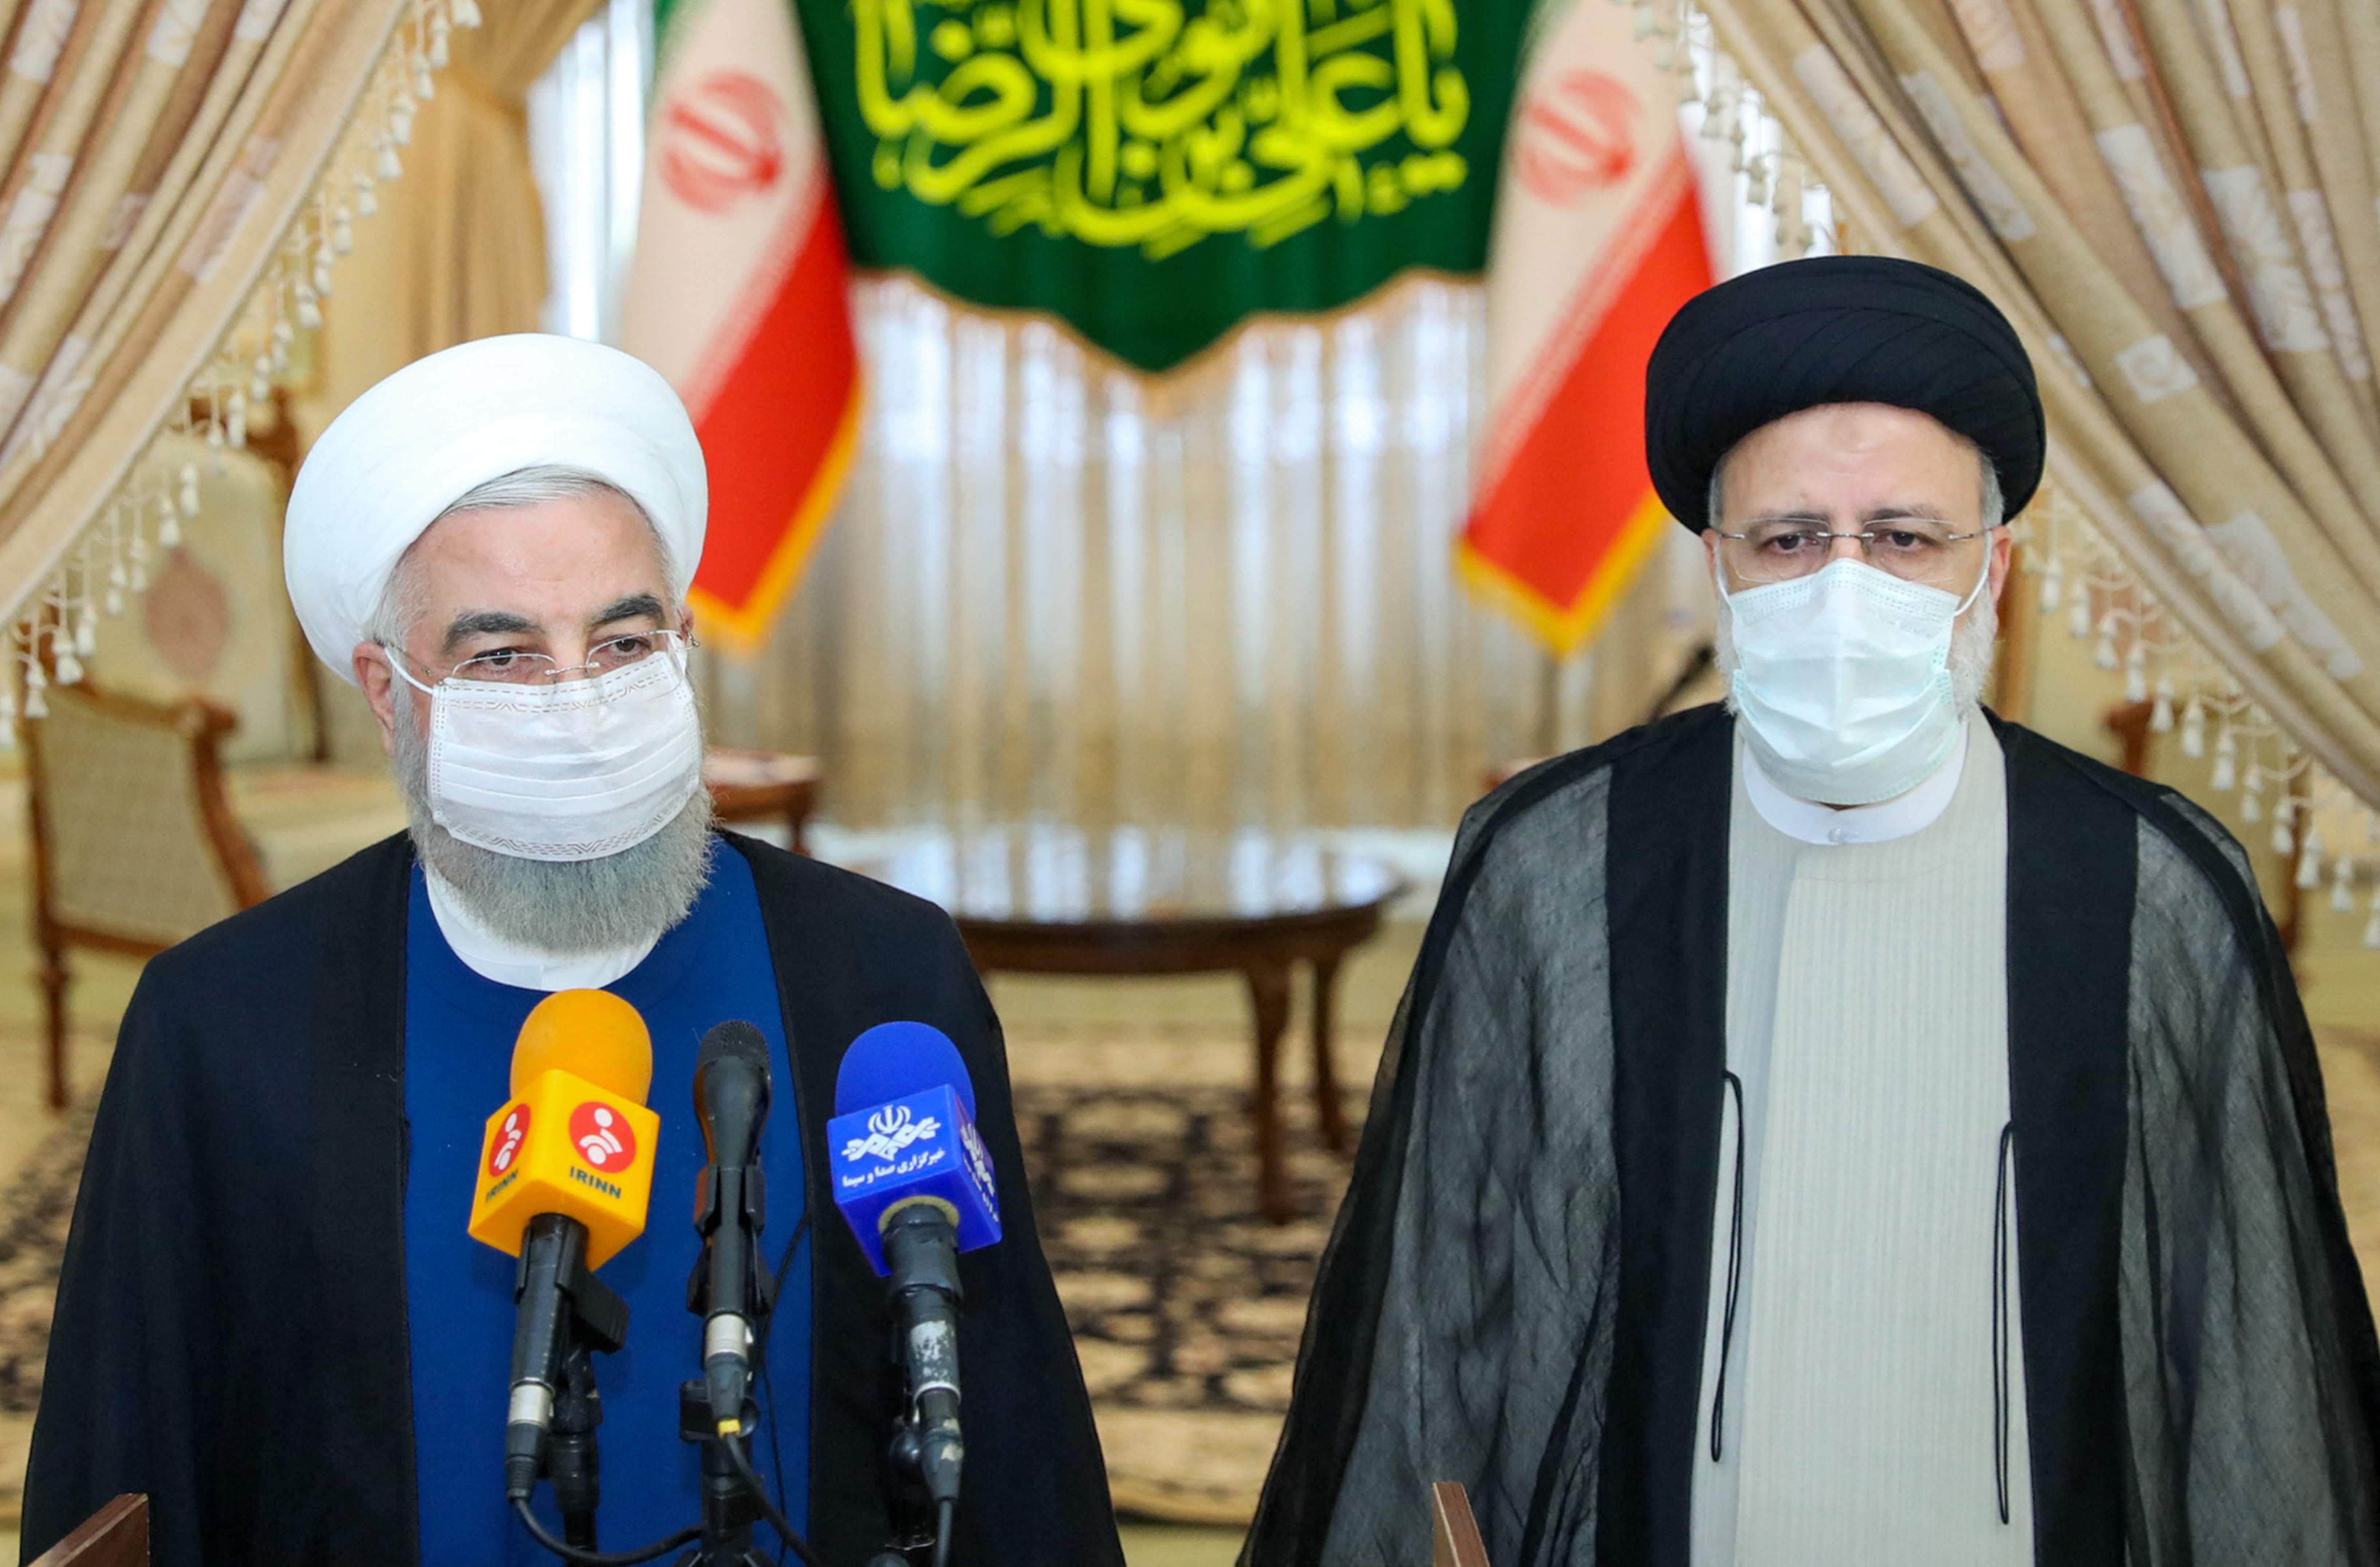 Outgoing president Hassan Rouhani (L) takes part in a press conference with president-elect Ebrahim Raisi